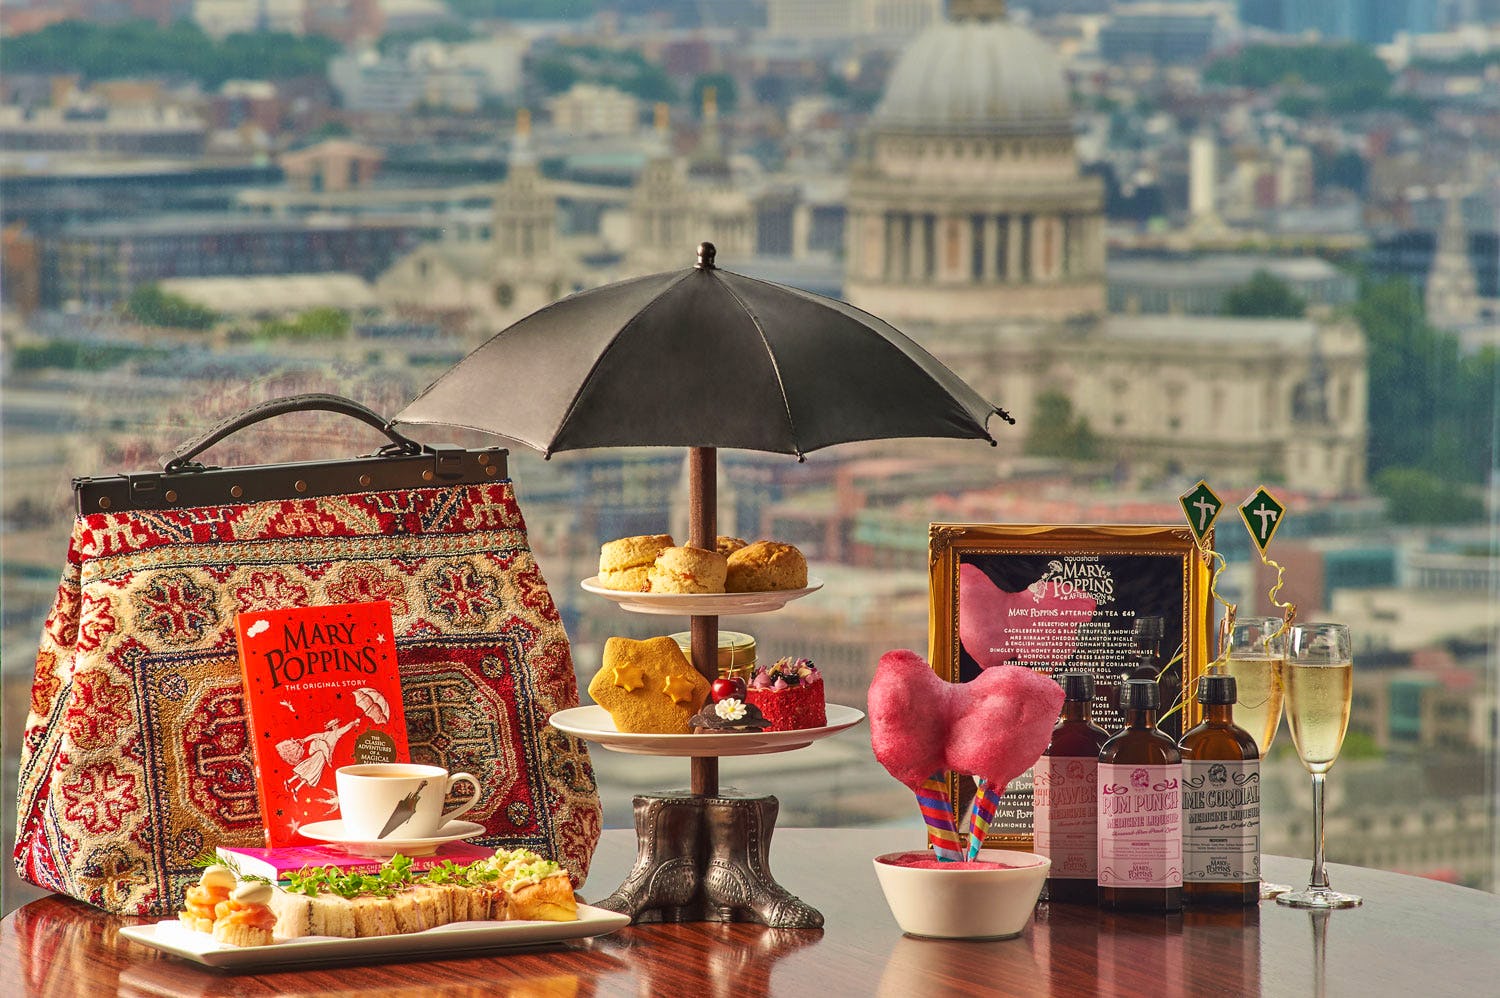 Afternoon tea dishes at the shard